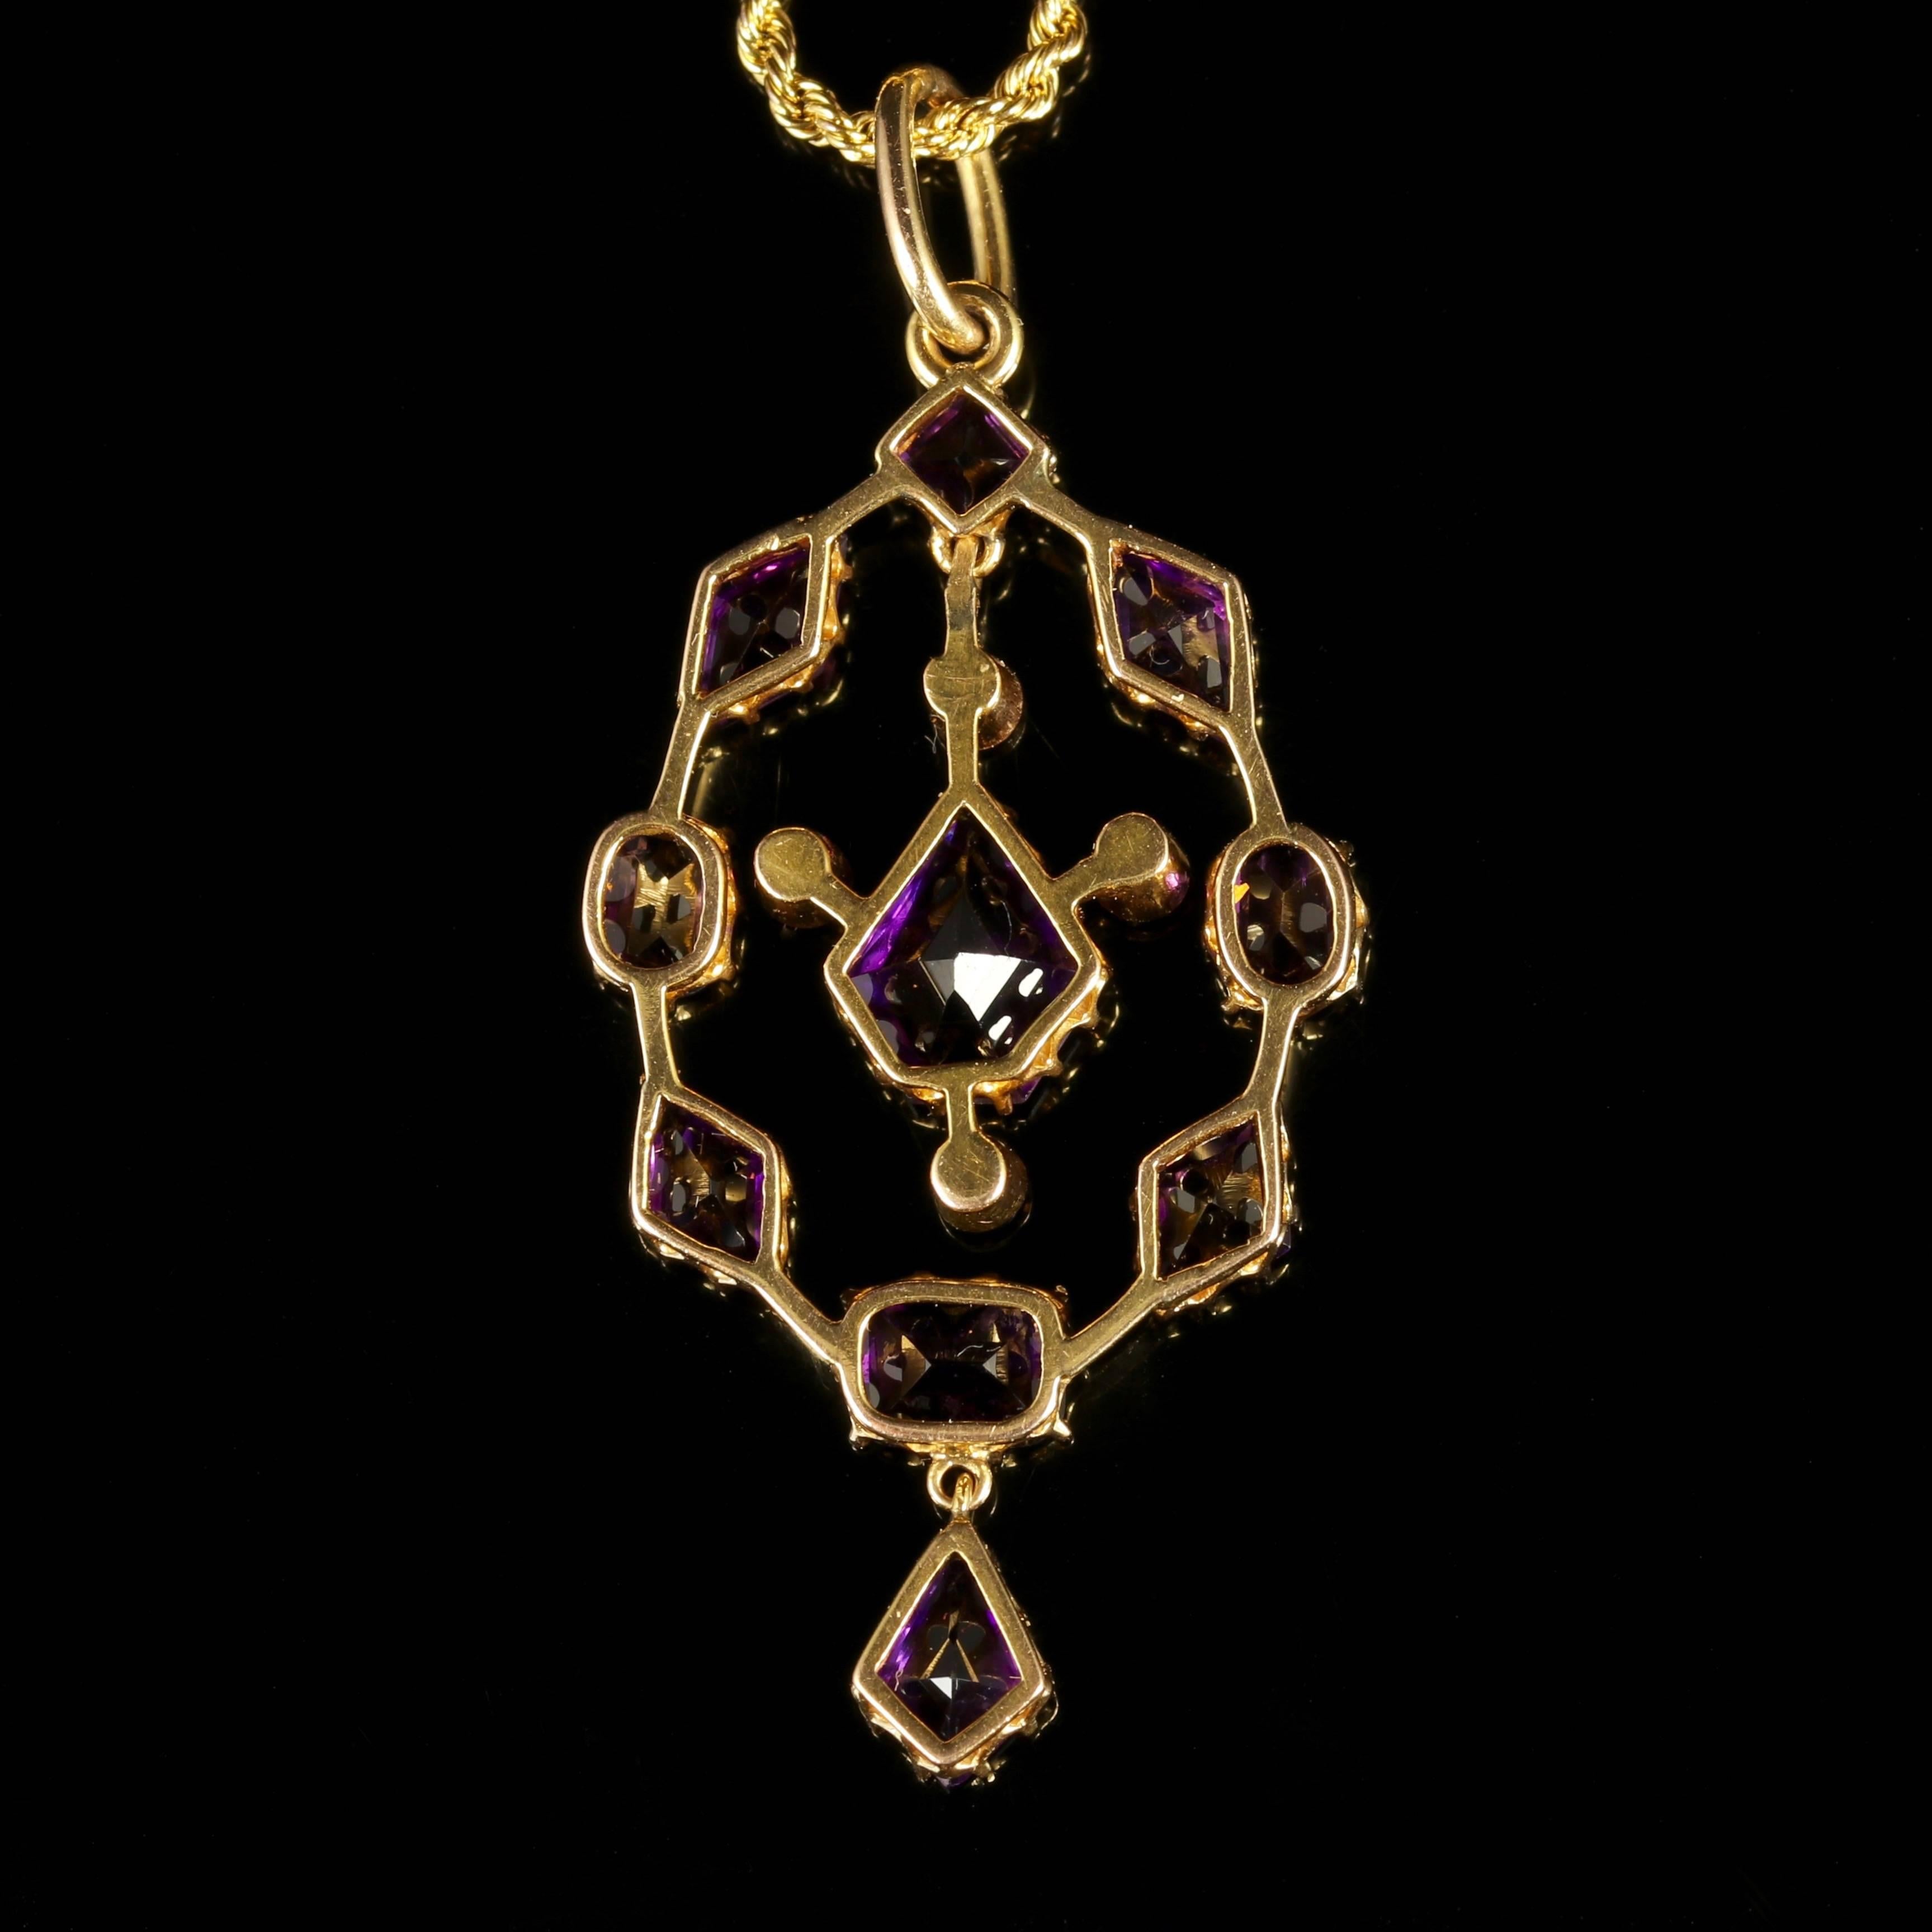 Women's Antique Victorian Amethyst Pendant and Necklace 15 Carat Gold